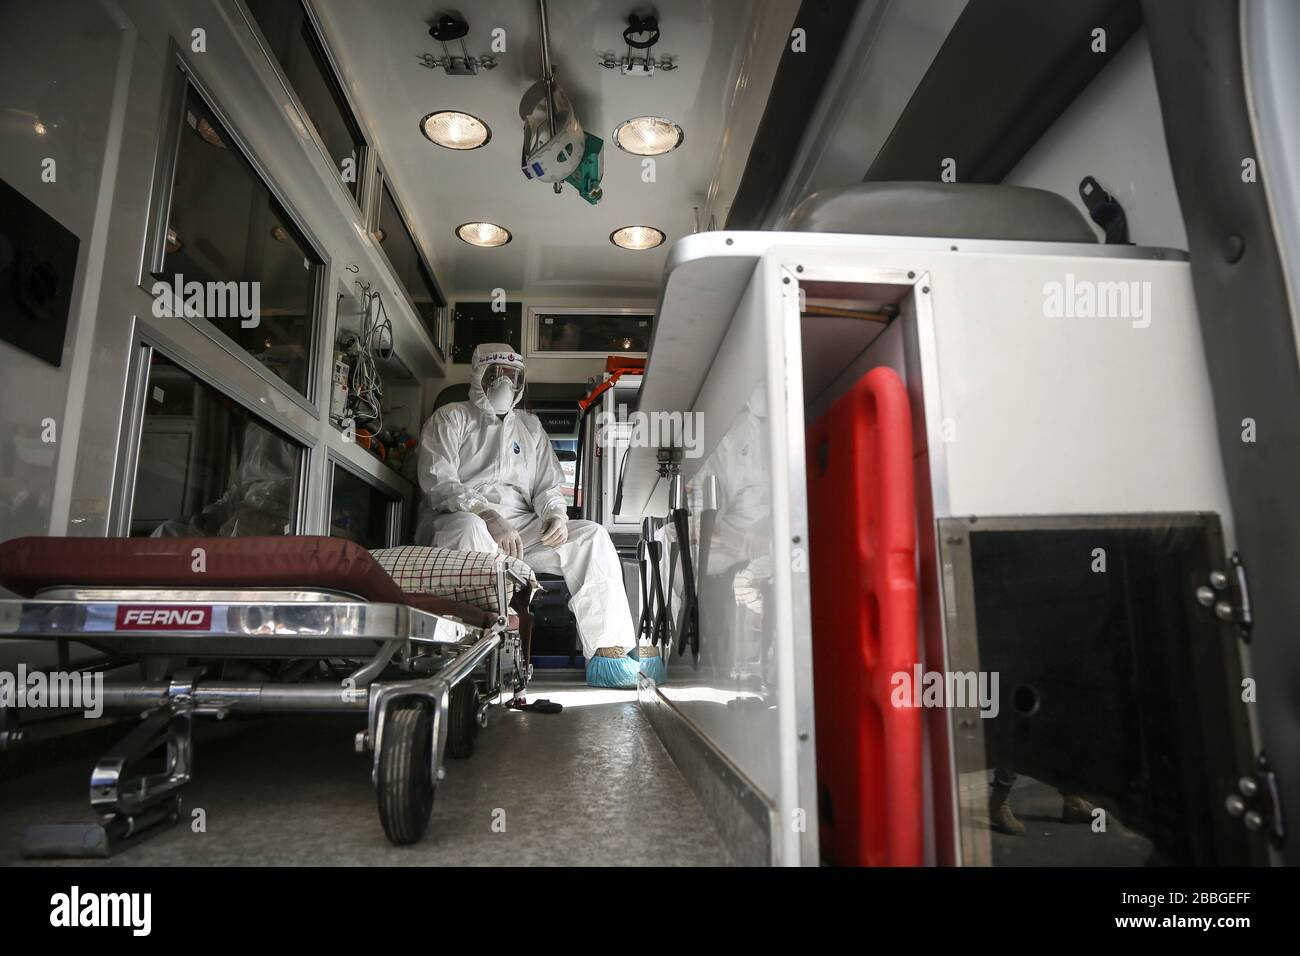 Beirut, Lebanon. 31st Mar, 2020. A member of the medical apparatus of the pro-Iranian party Hezbollah, is seen wearing full protective gear inside an ambulance during a street show to demonstrate readiness for the coronavirus battle. Hezbollah is mobilizing thousands of front line medics and readying field hospitals as well as carrying disinfection works at the Lebanese streets to help confront the coronavirus pandemic. Credit: Marwan Naamani/dpa/Alamy Live News Stock Photo